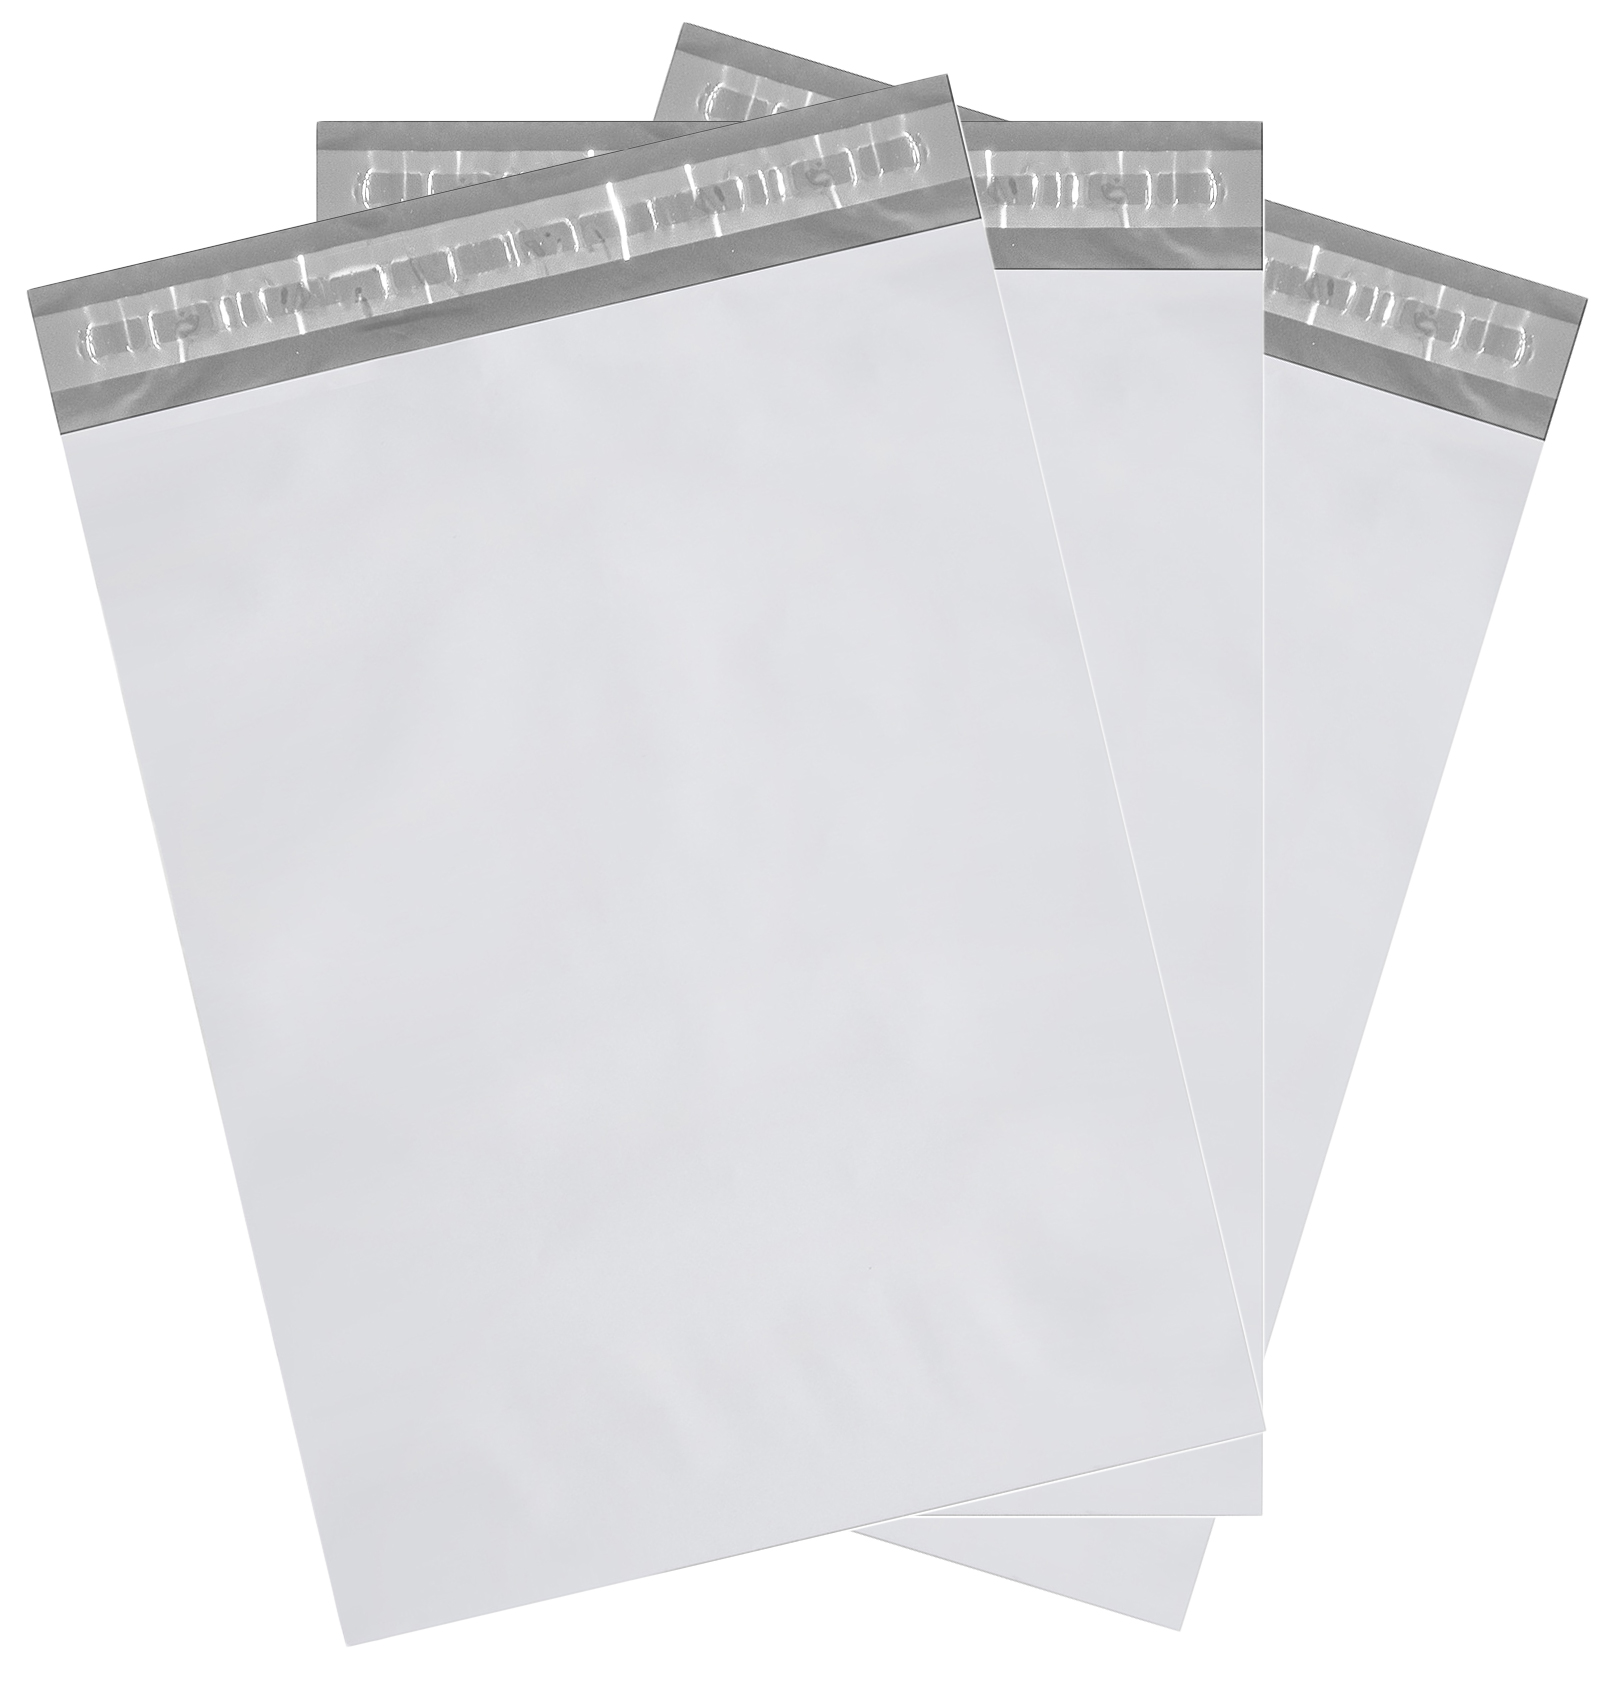 25 14.5x19 White Poly Mailers Bag Self Seal Shipping 14.5" x 19" 2 MIL